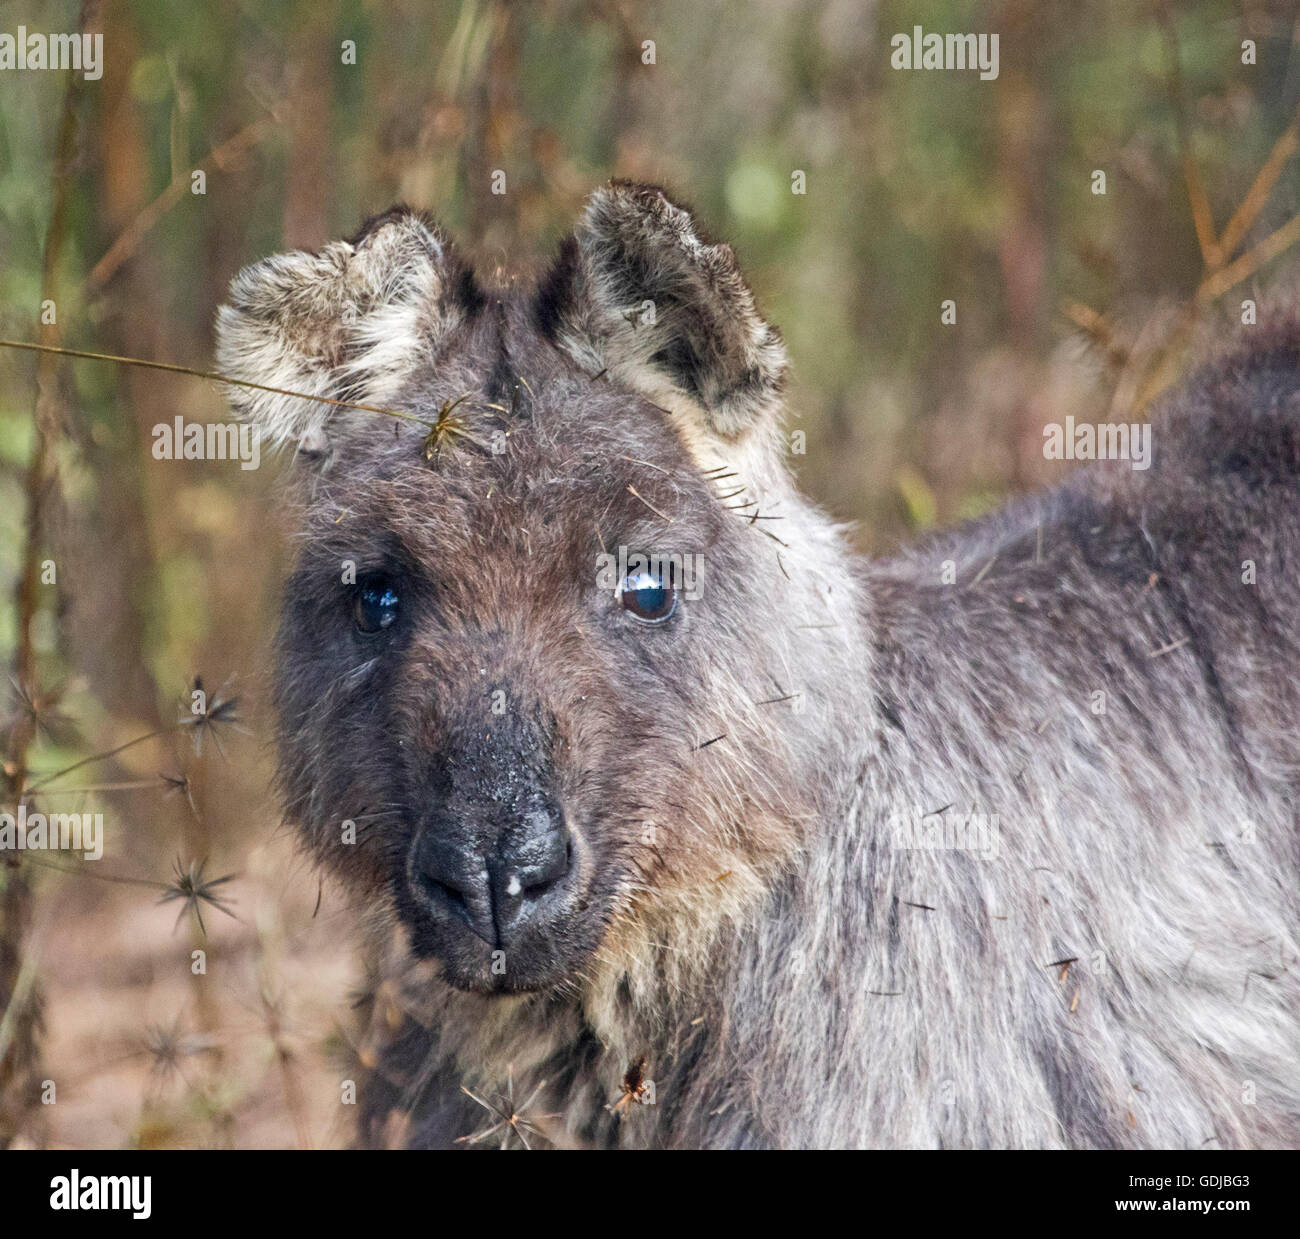 Beautiful face of old wallaroo, Macropus robustus in the wild with gleaming eyes & long dark grey/brown fur staring at camera with alert expression Stock Photo